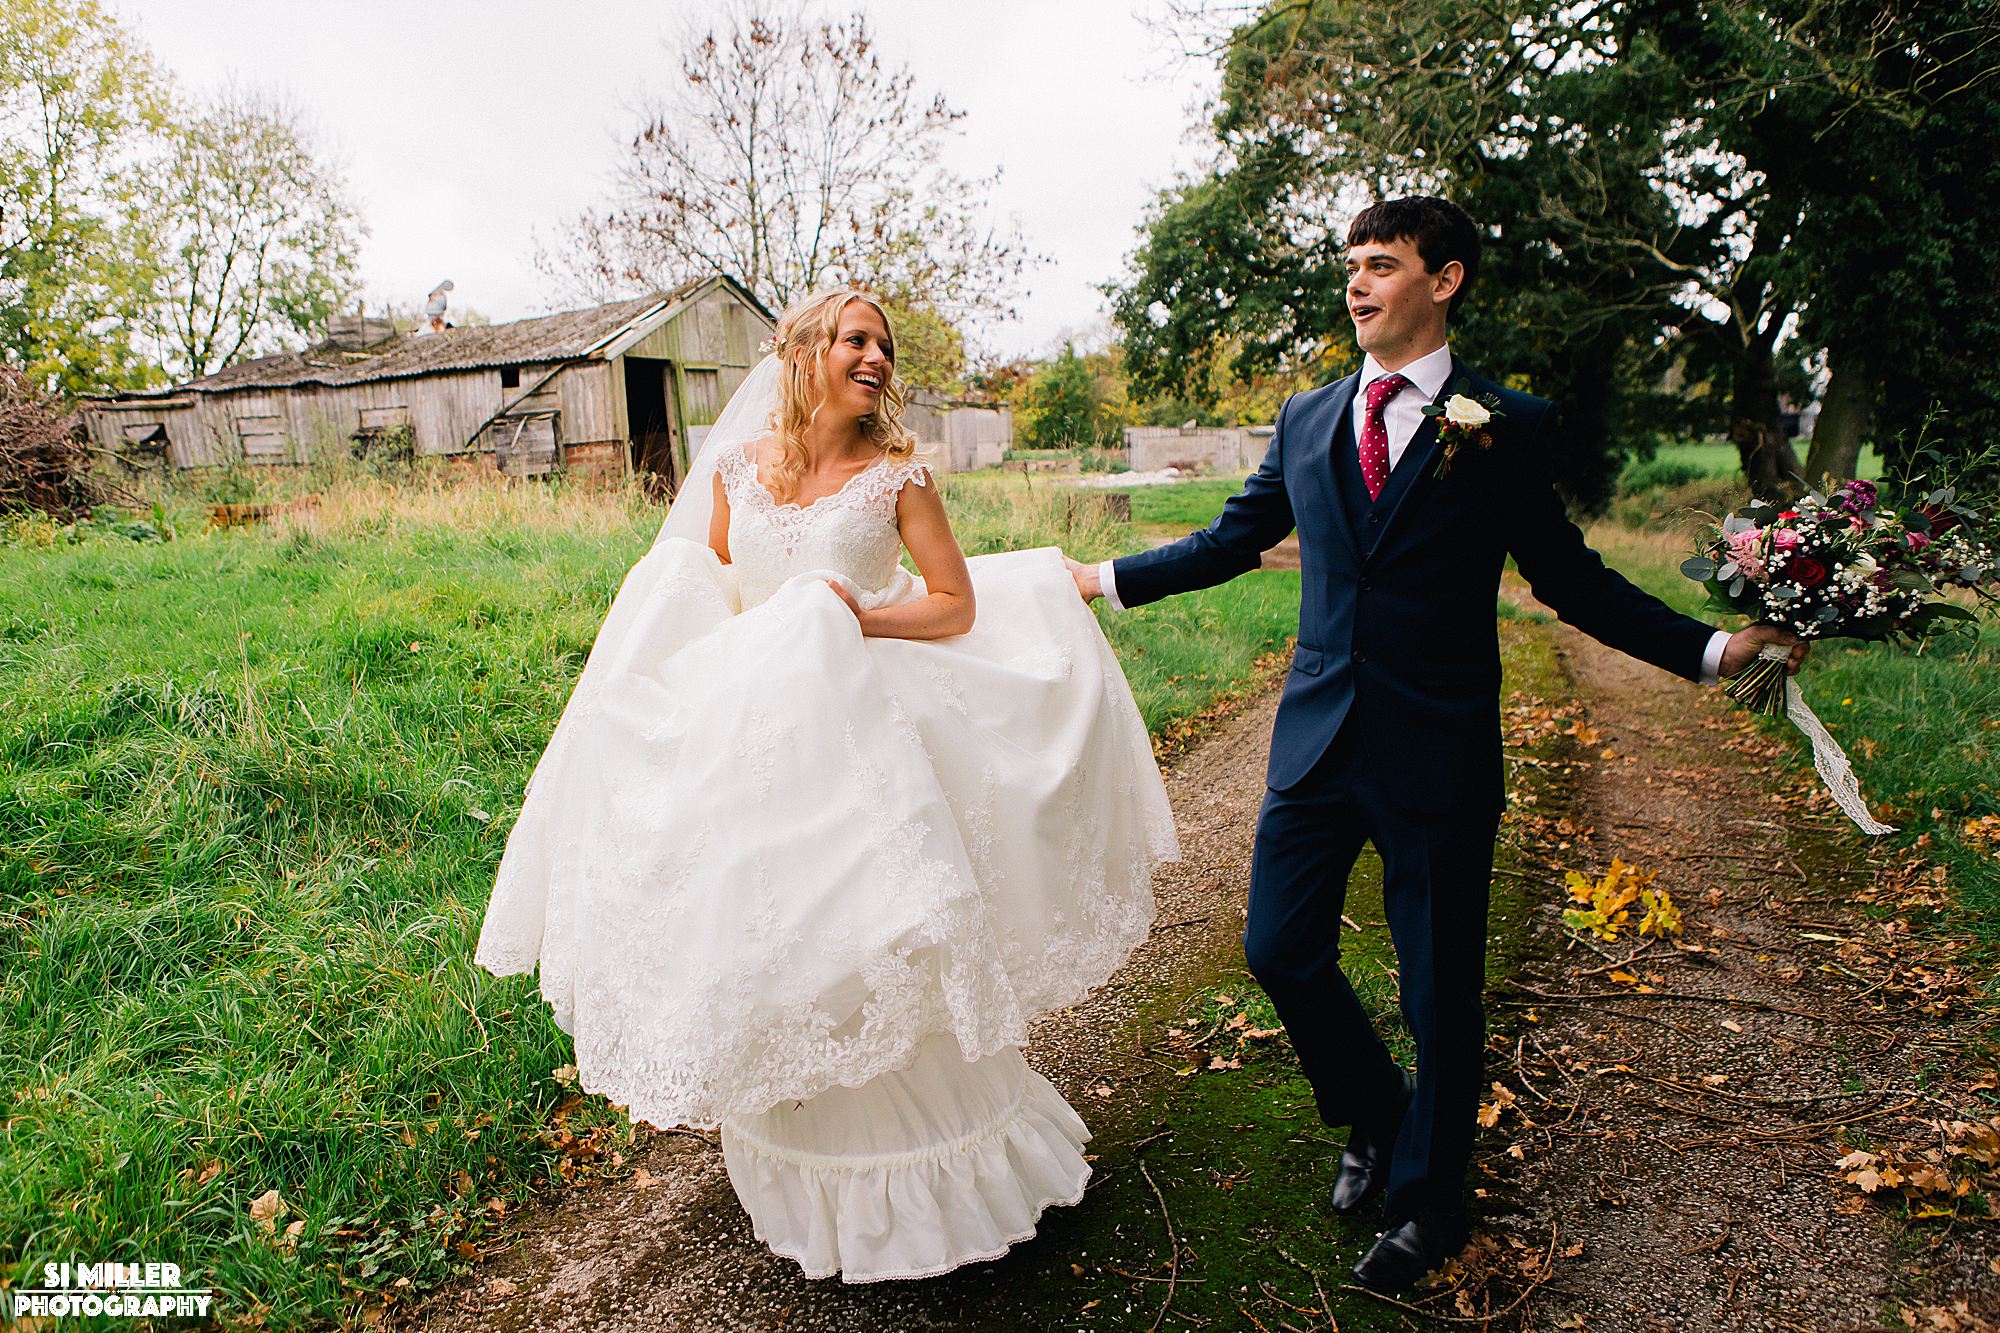 Bride and groom walking and laughing with boutique 